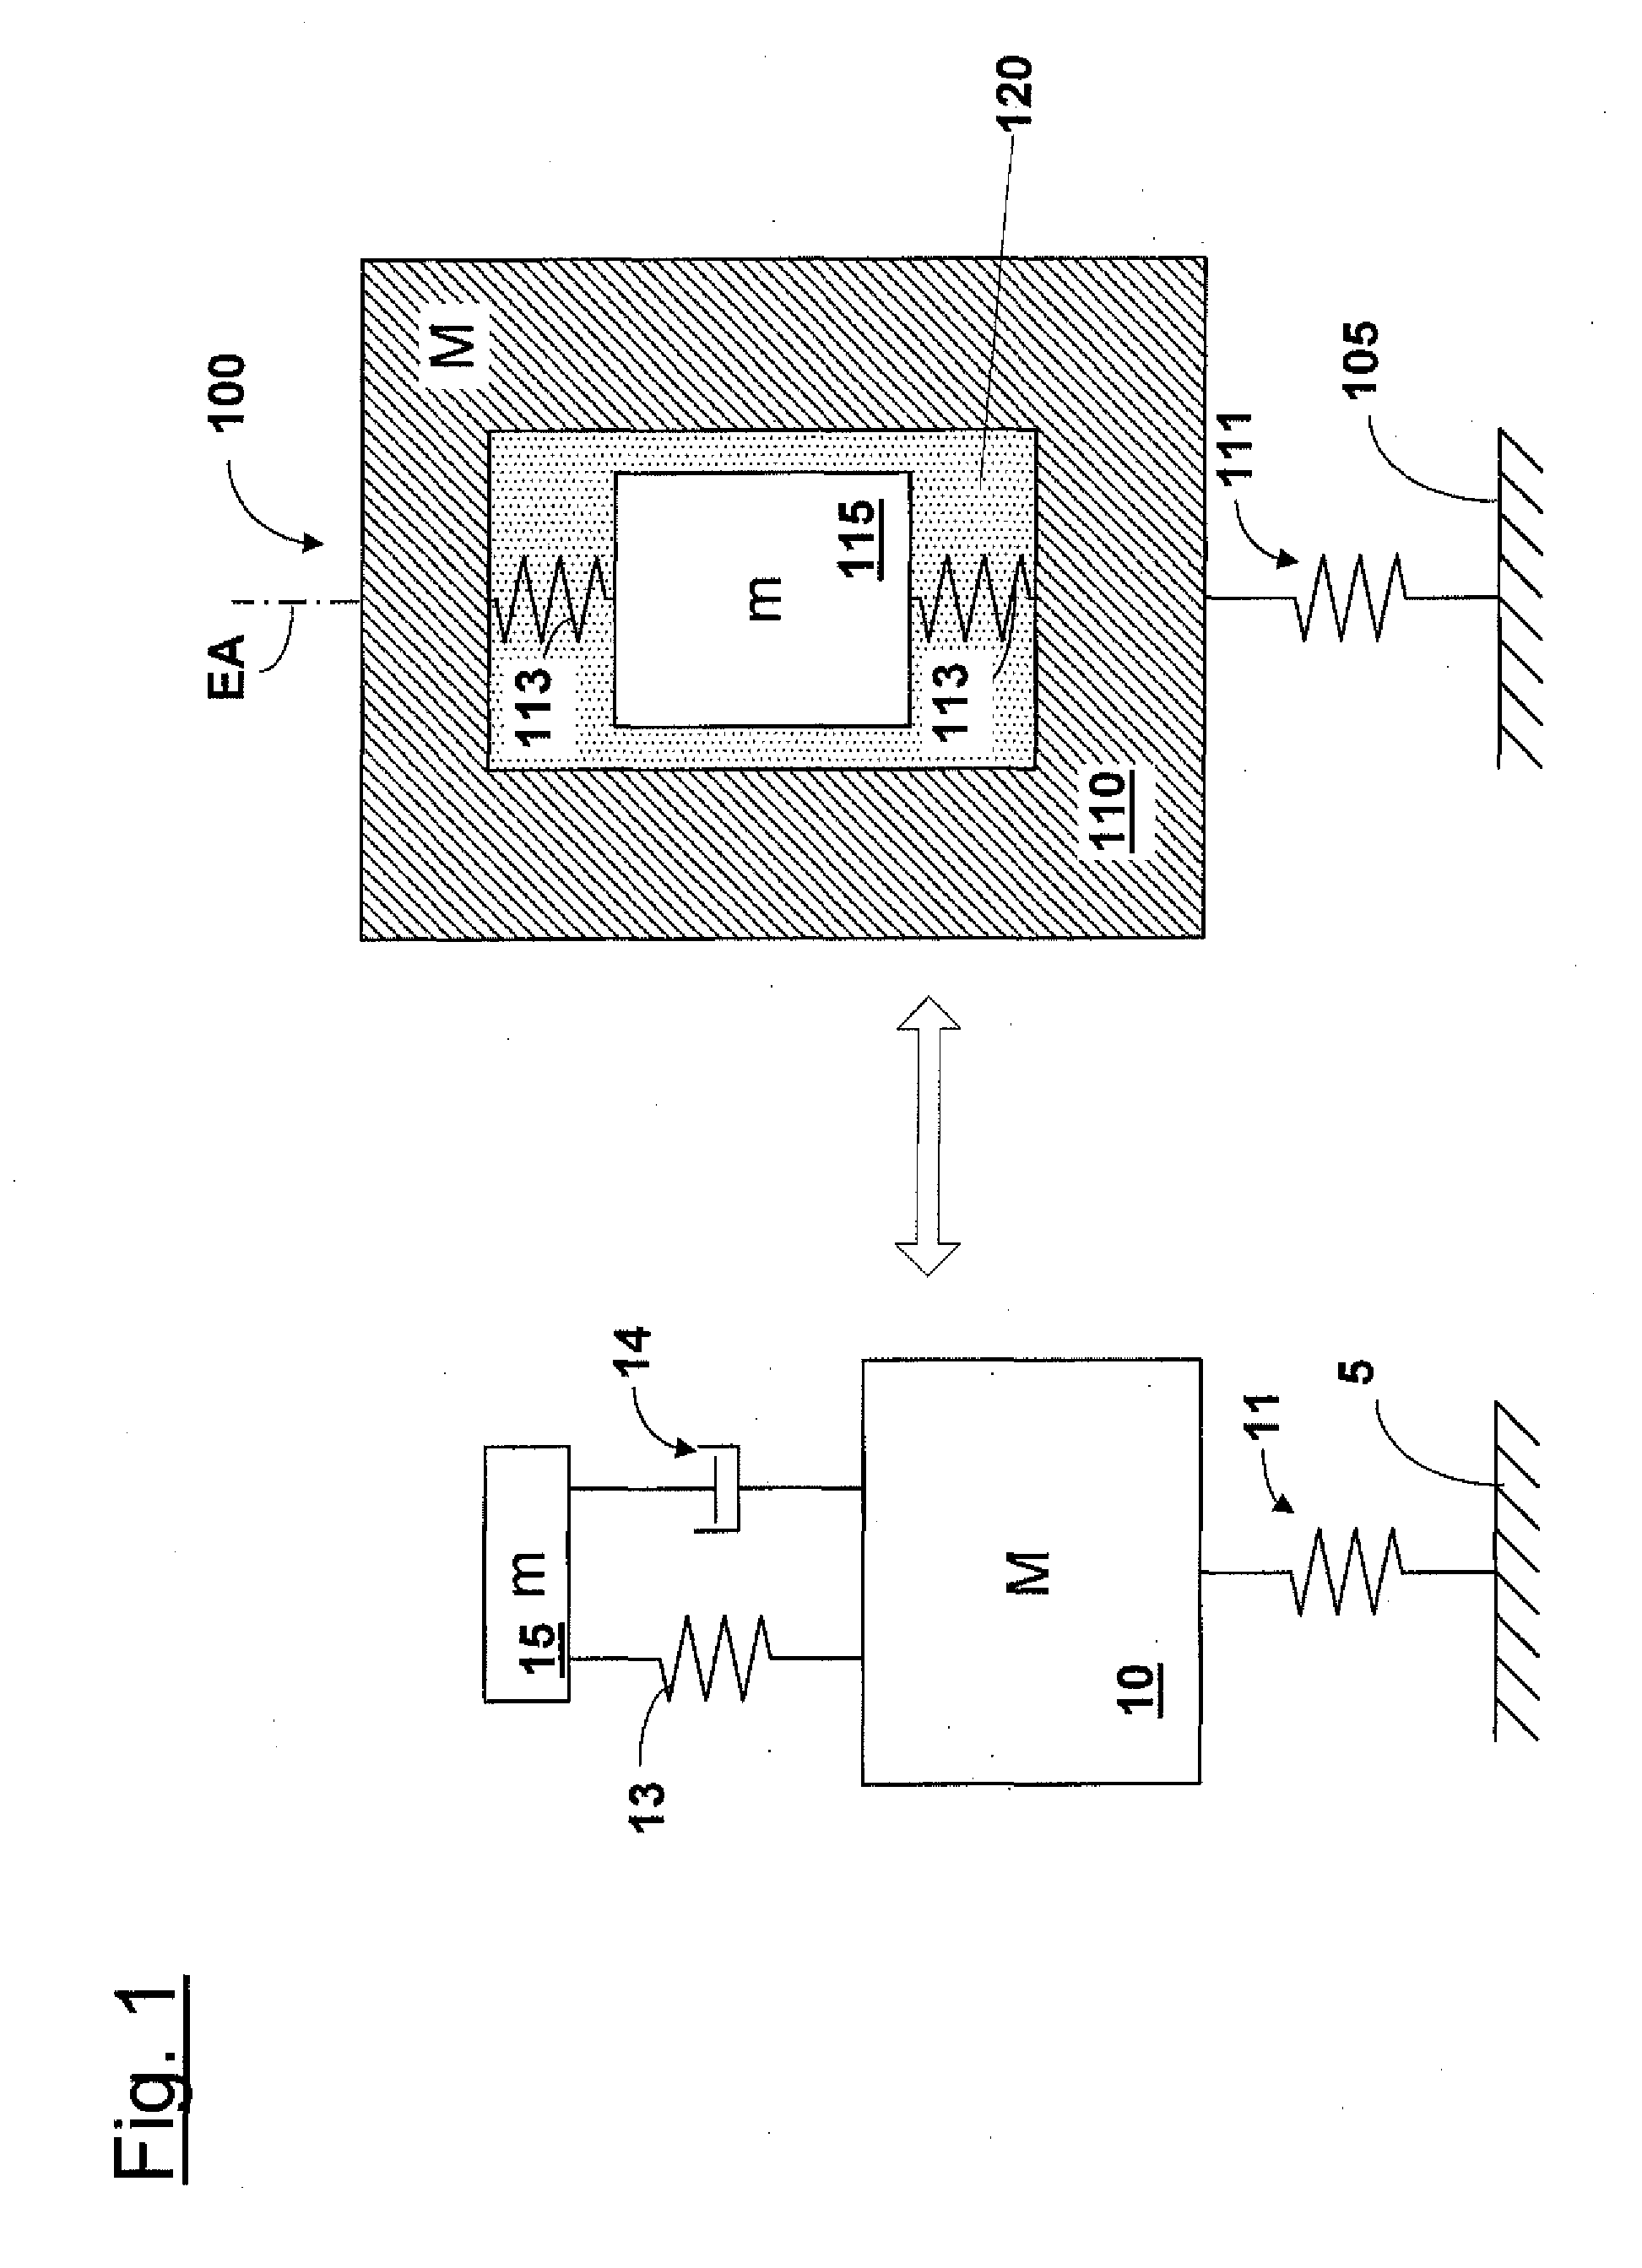 Damping arrangement for dissipating oscillating energy of an element in a system, more particularly in a microlithographic projection exposure apparatus